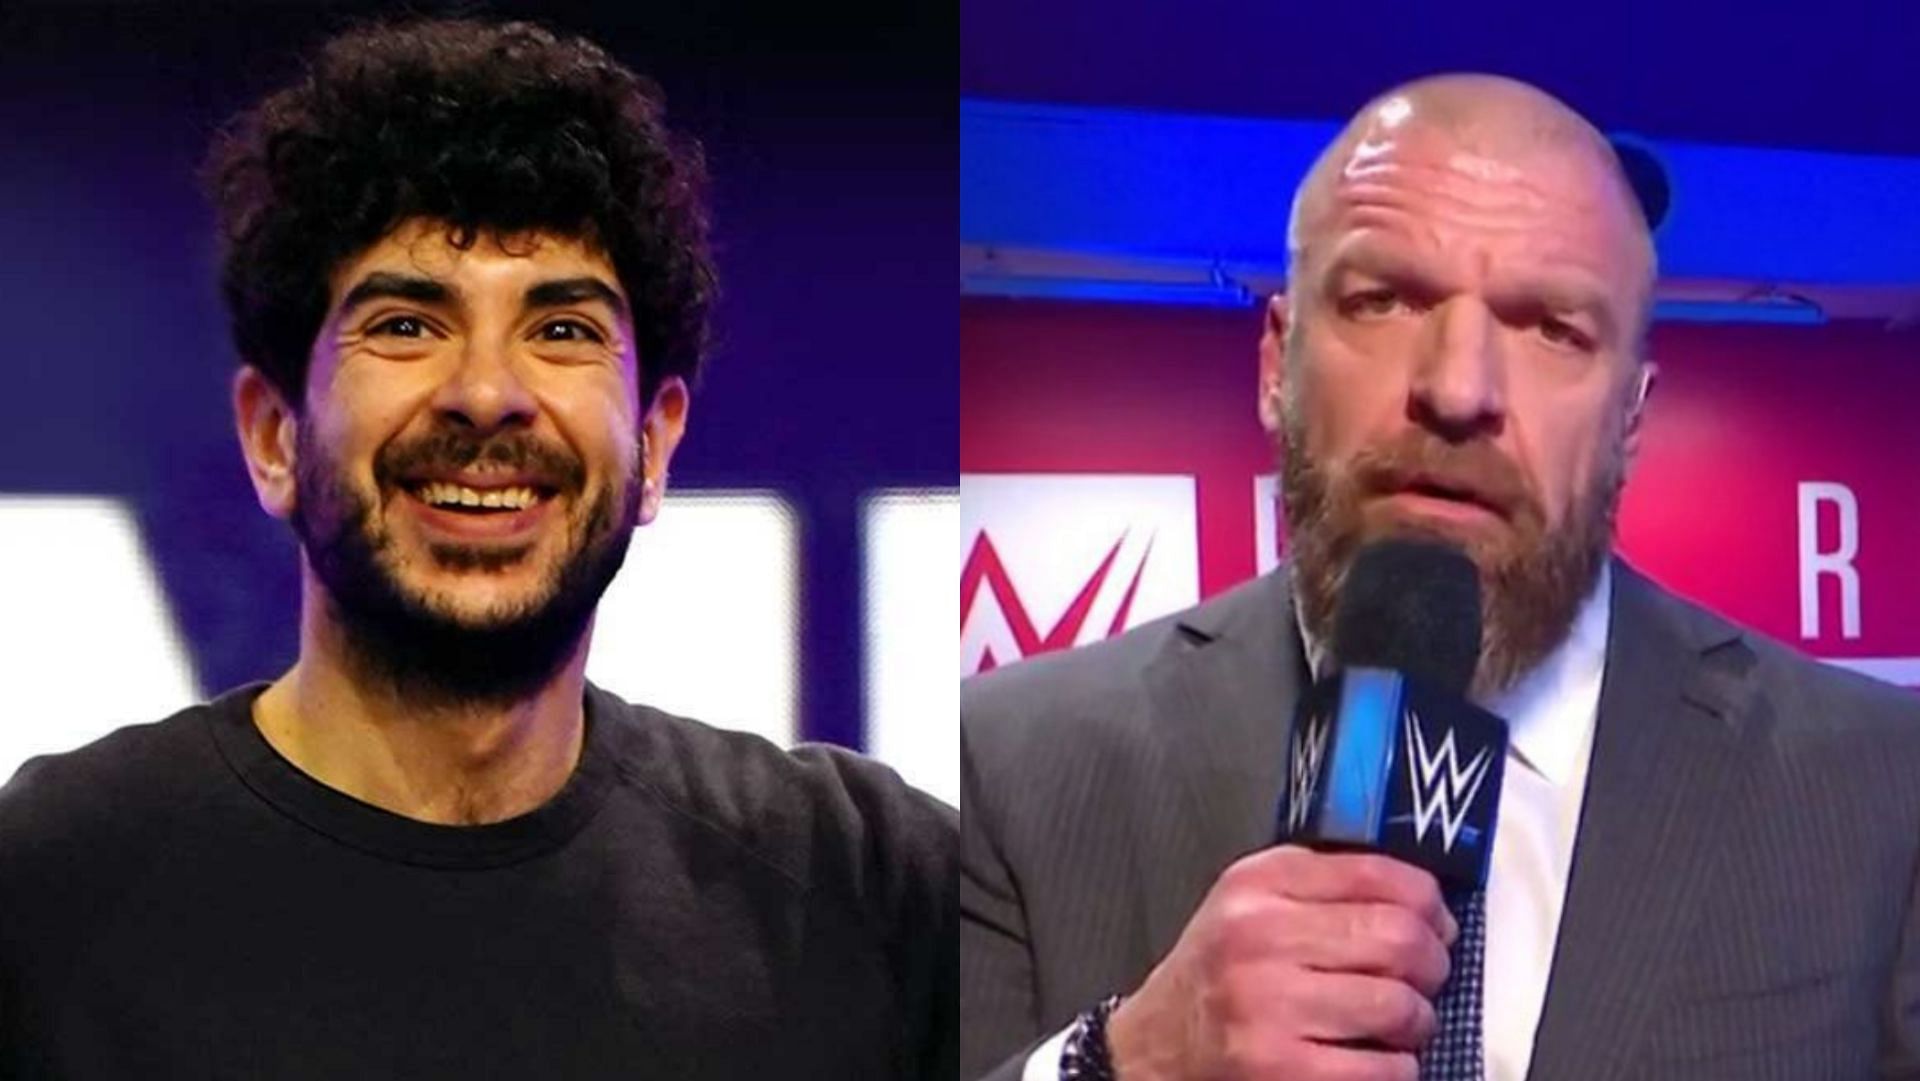 Tony Khan and Triple H are the two biggest creative minds in wrestling